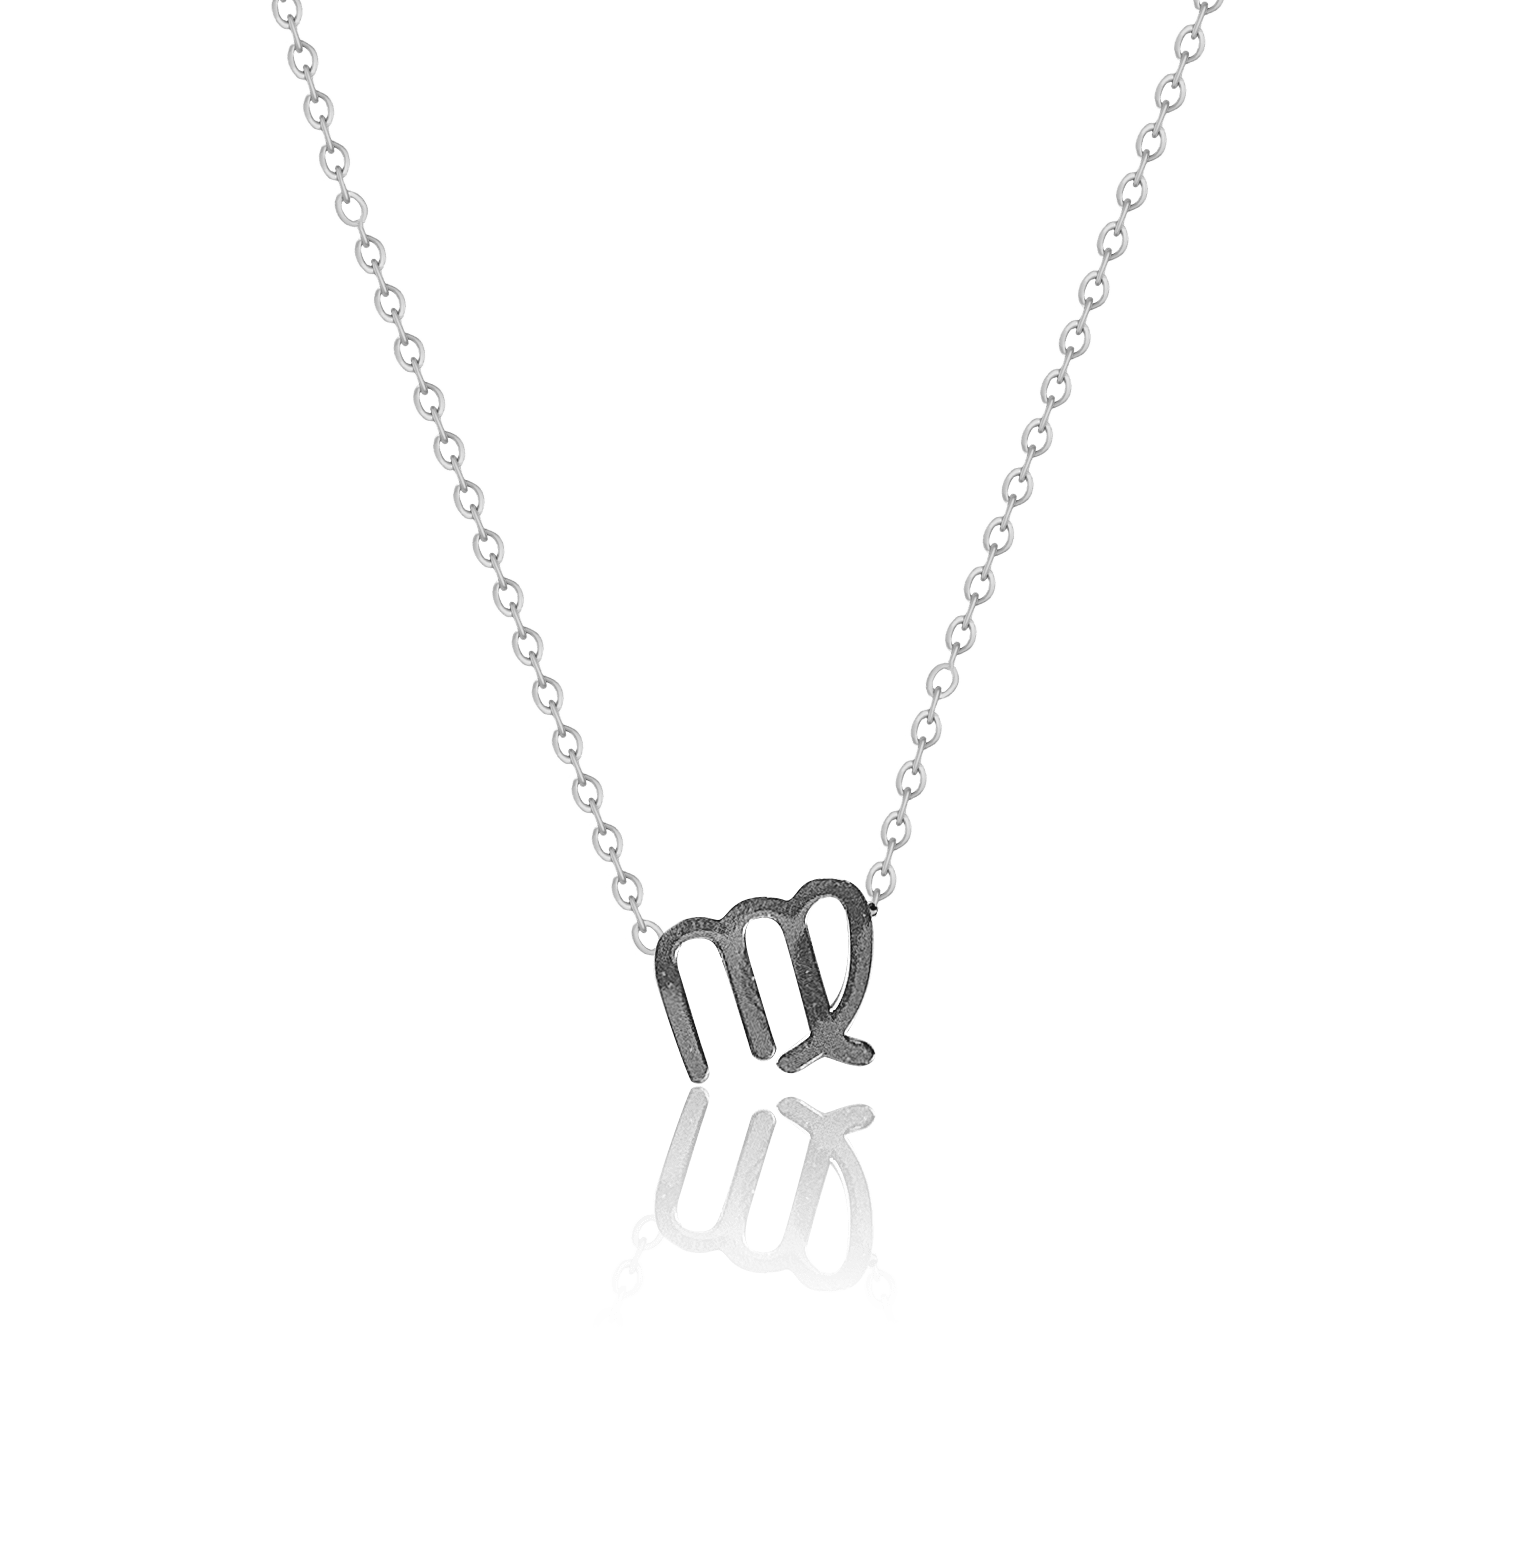 bianco rosso Necklaces Silver Virgo - Necklace cyprus greece jewelry gift free shipping europe worldwide